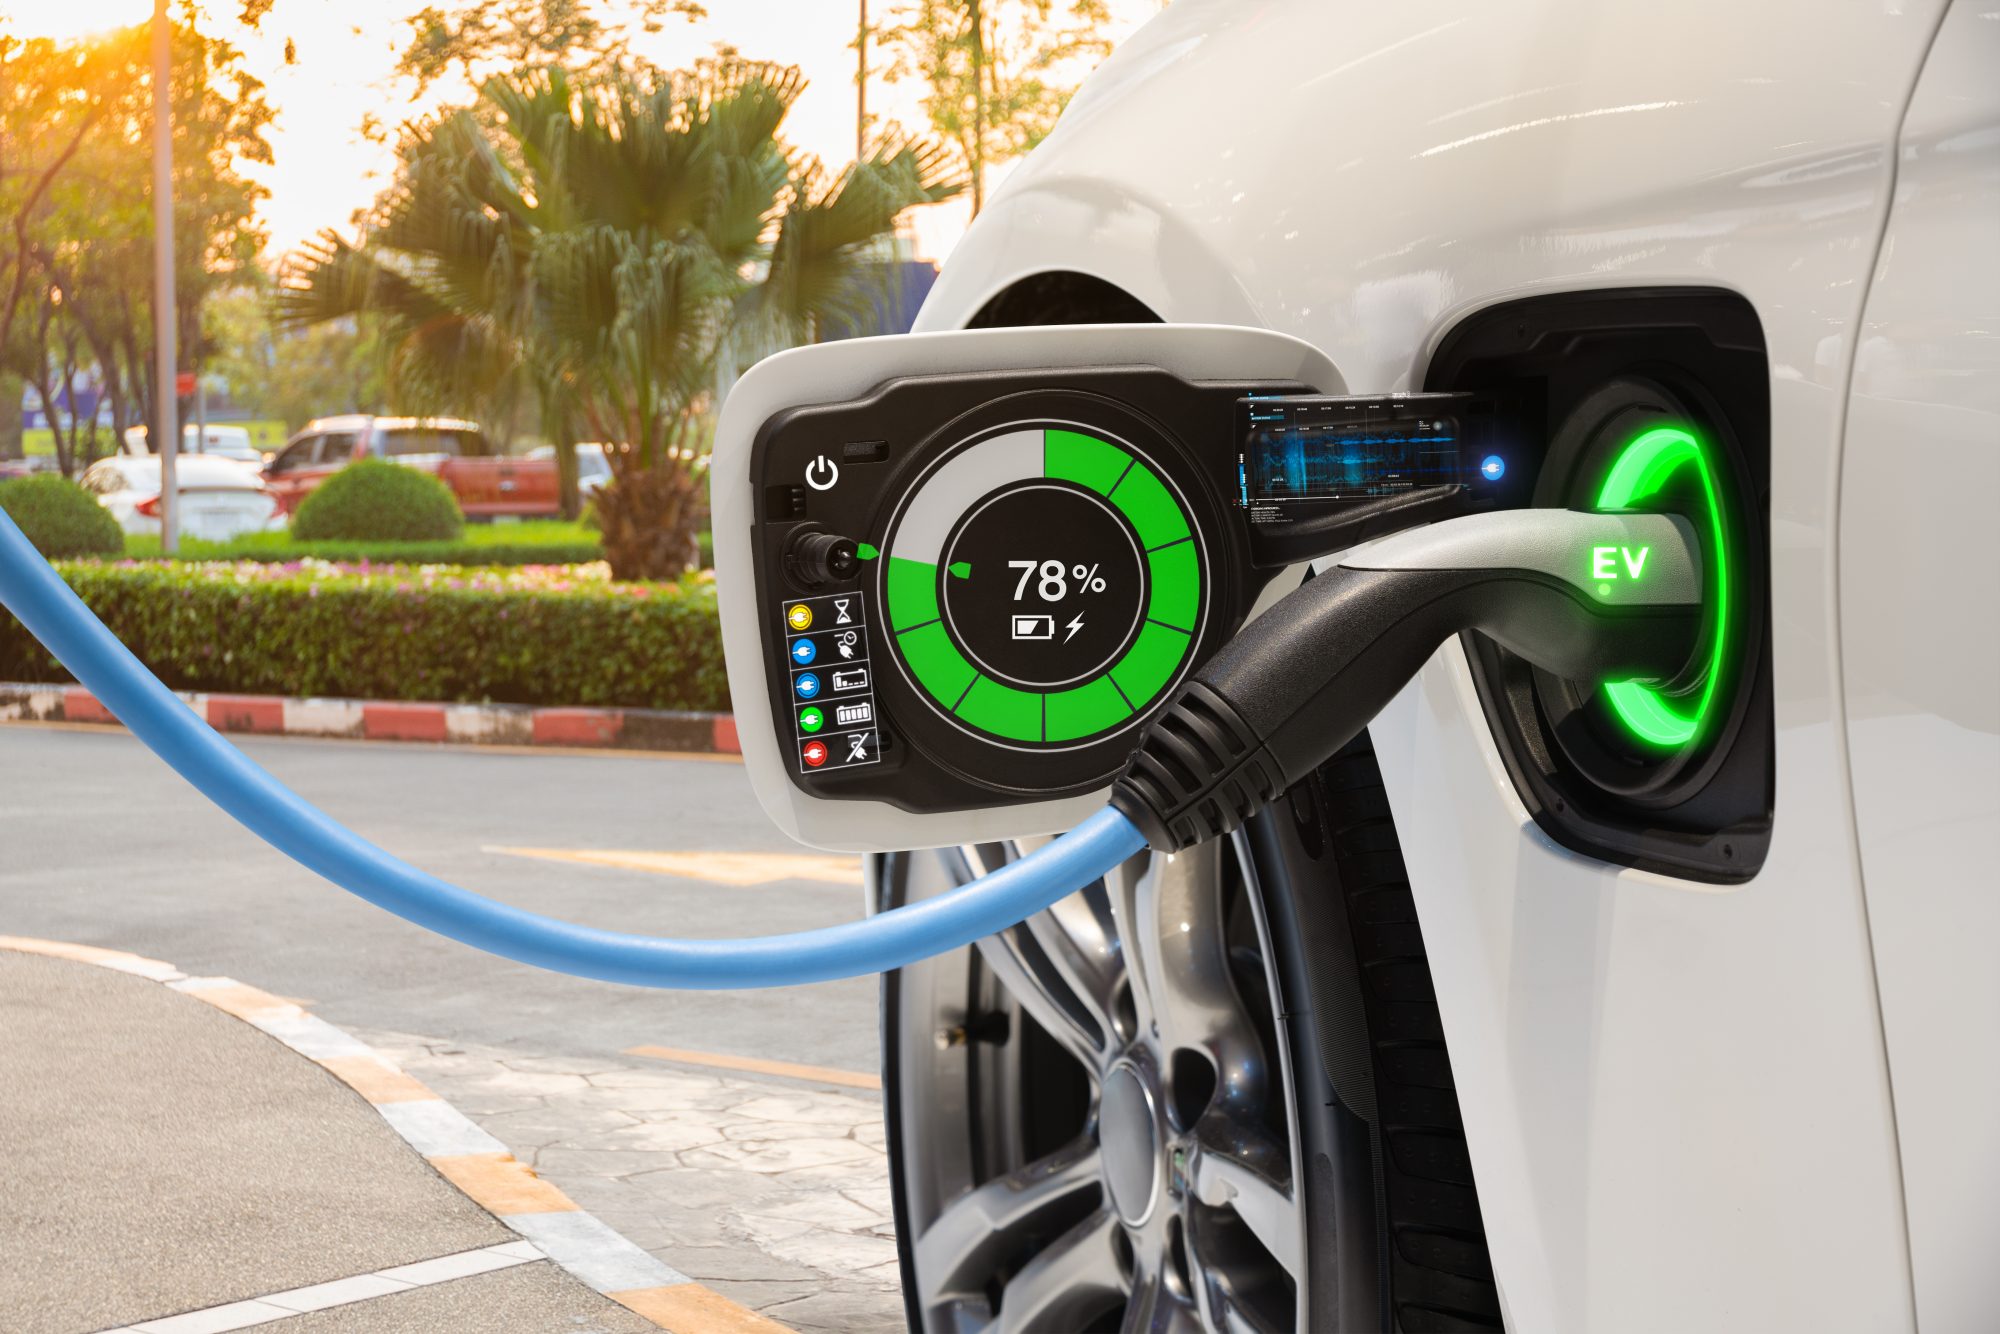 The EV fleets are coming - but are we ready for them?